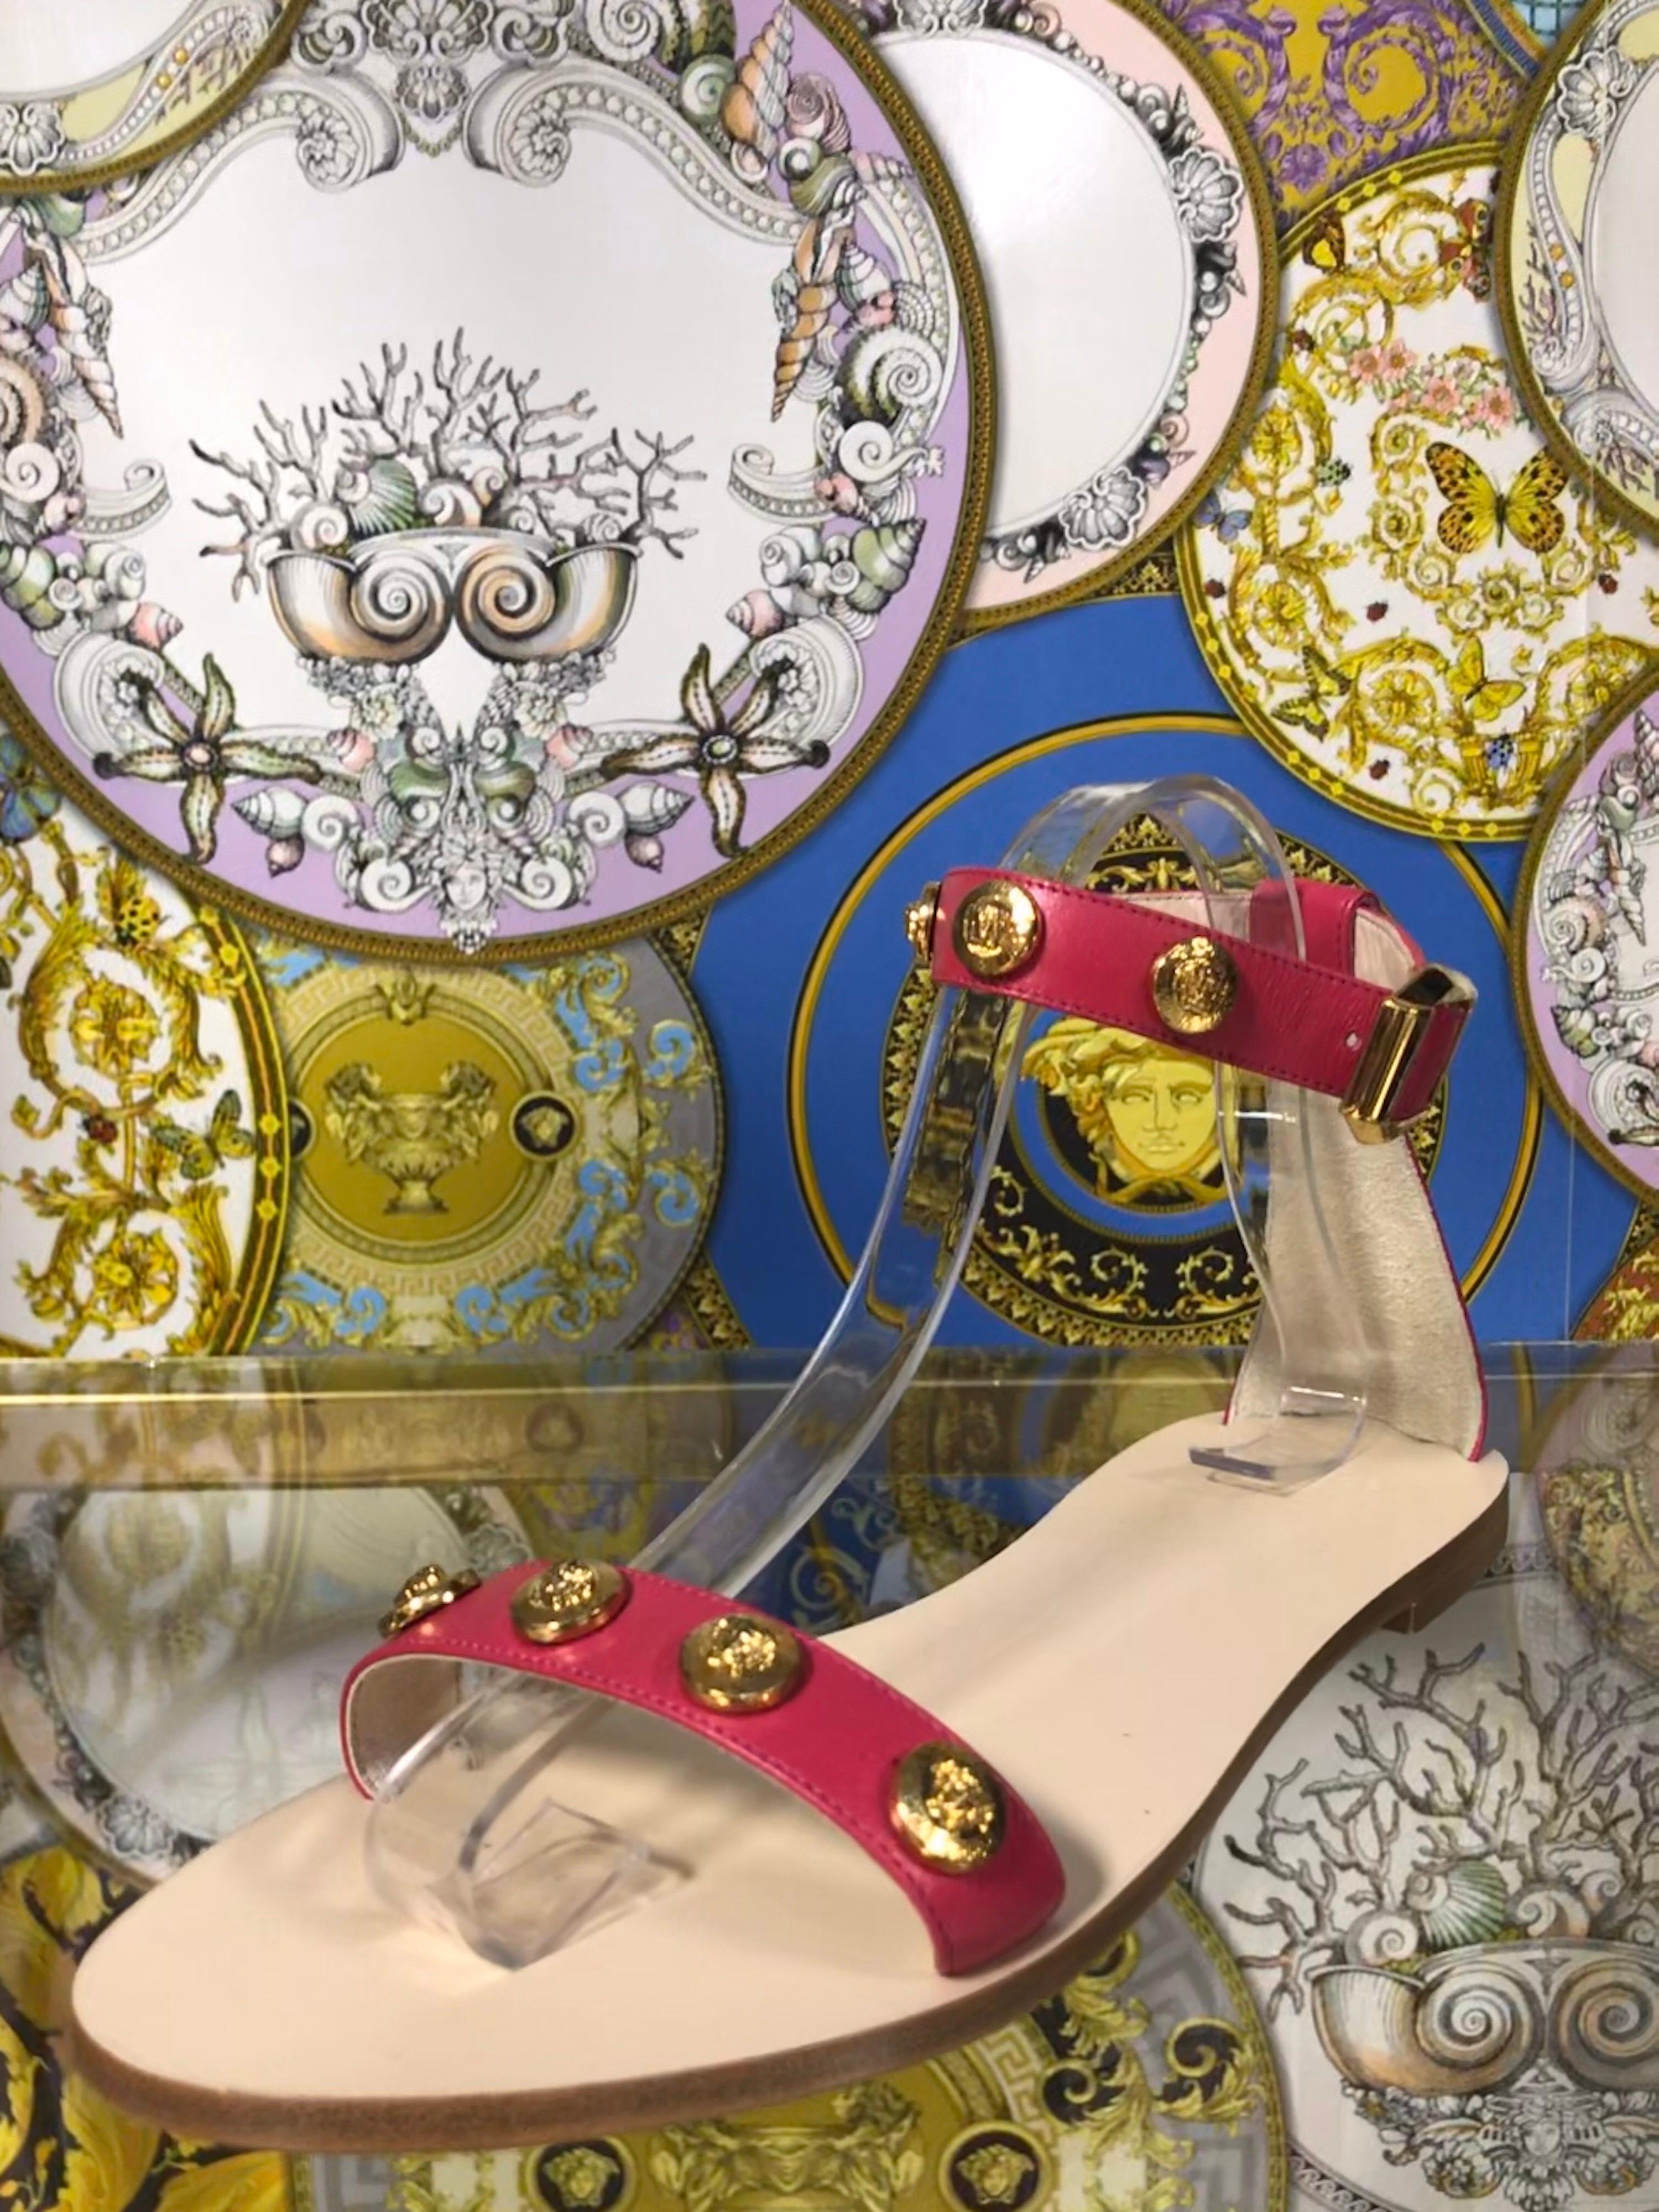 VERSACE 



Ankle strap sandals

These sandals from Versace featuring 
Medusa gold metallic studs, open round toe, buckle fastening ankle strap.

100% leather
 
IT Size 39 - US 9

Made in Italy

Brand new. In VERSACE box.

